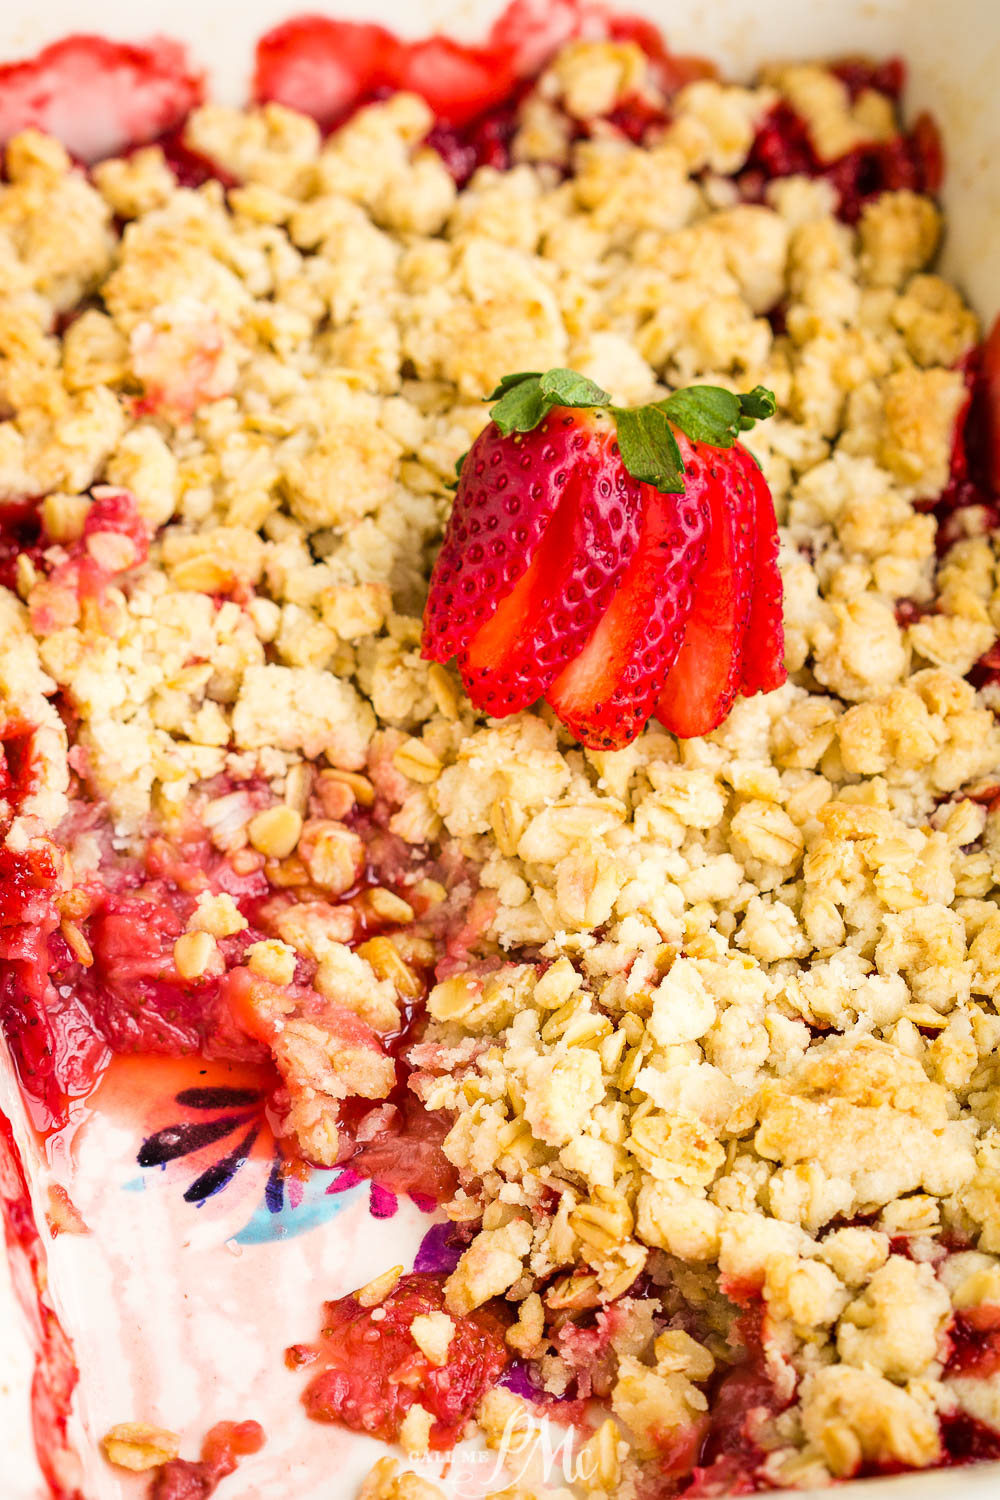 Strawberry Crisp (Crumble) with Oats